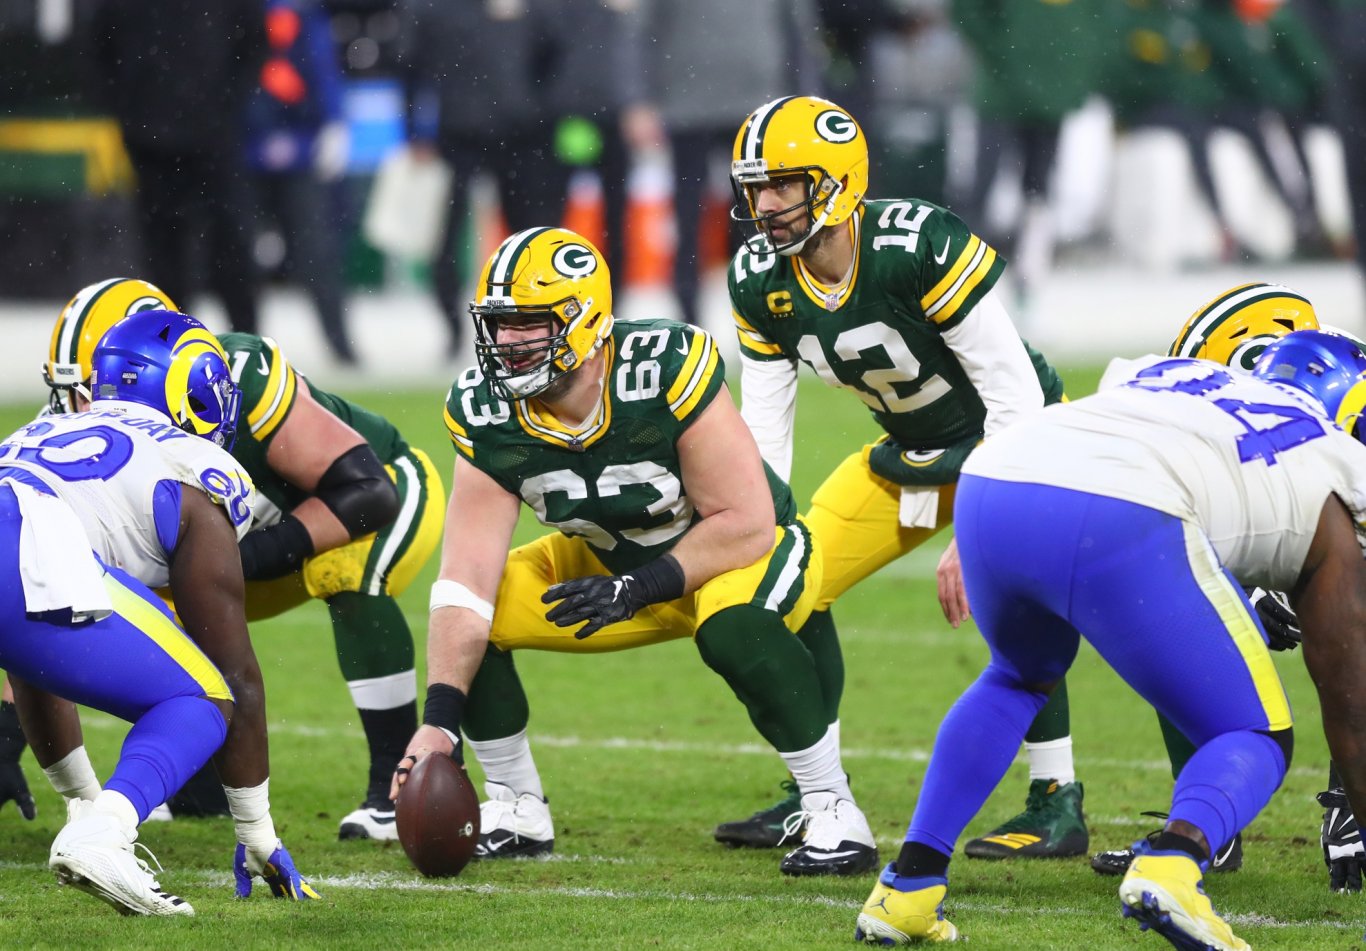 Packers Stout OL has Question Marks Entering 2021